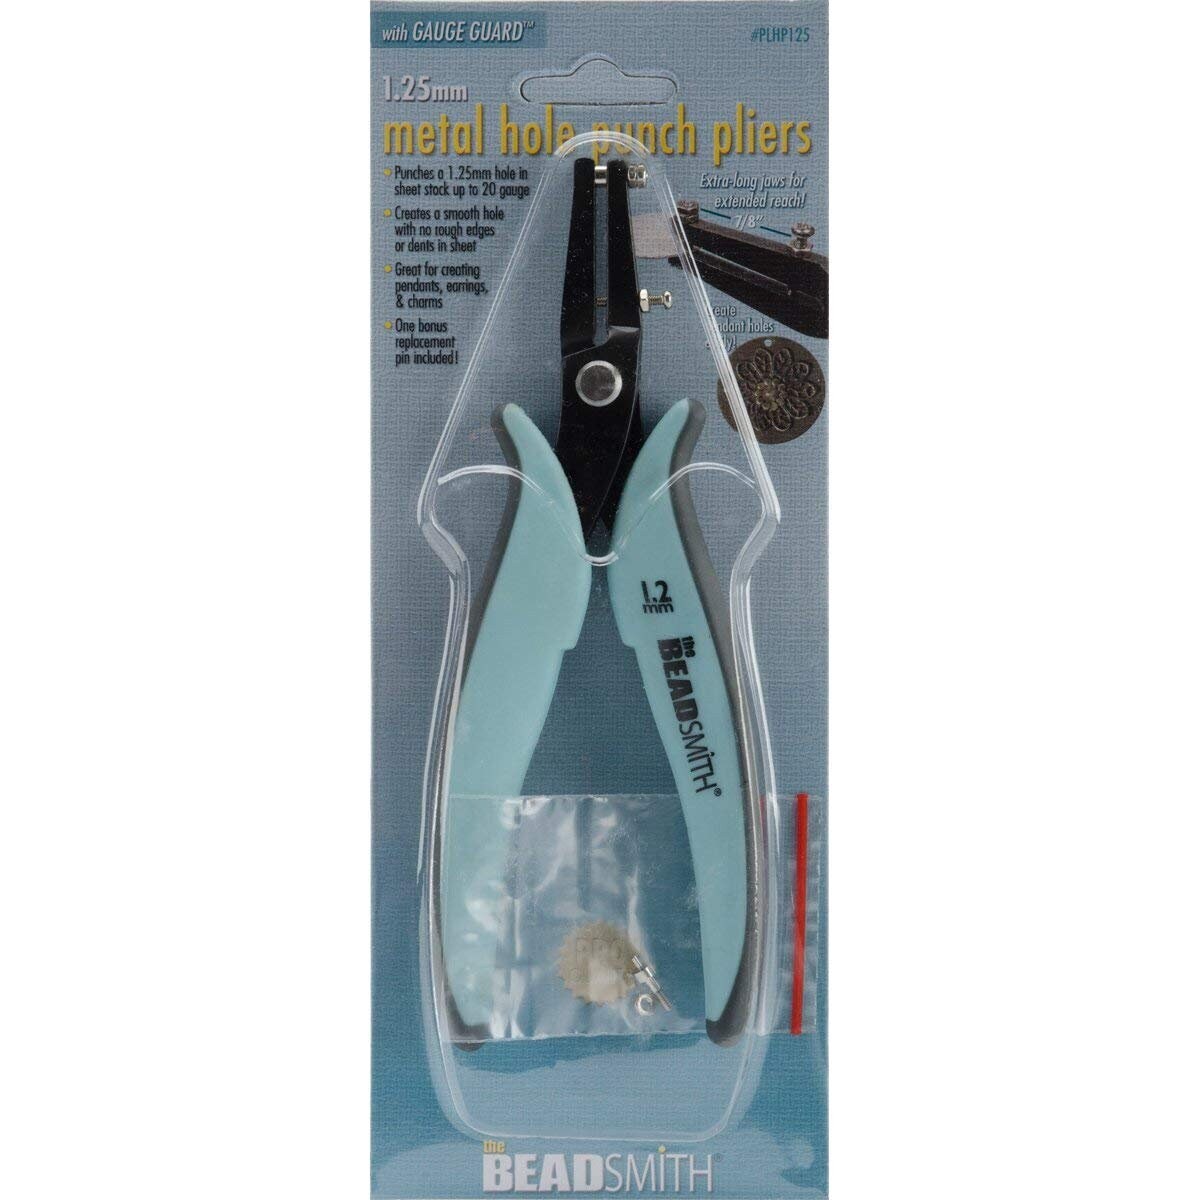 1.25mm metal hole punch pliers by beadsmith, with extra pin with gauge guard for jewelry making #plhp125